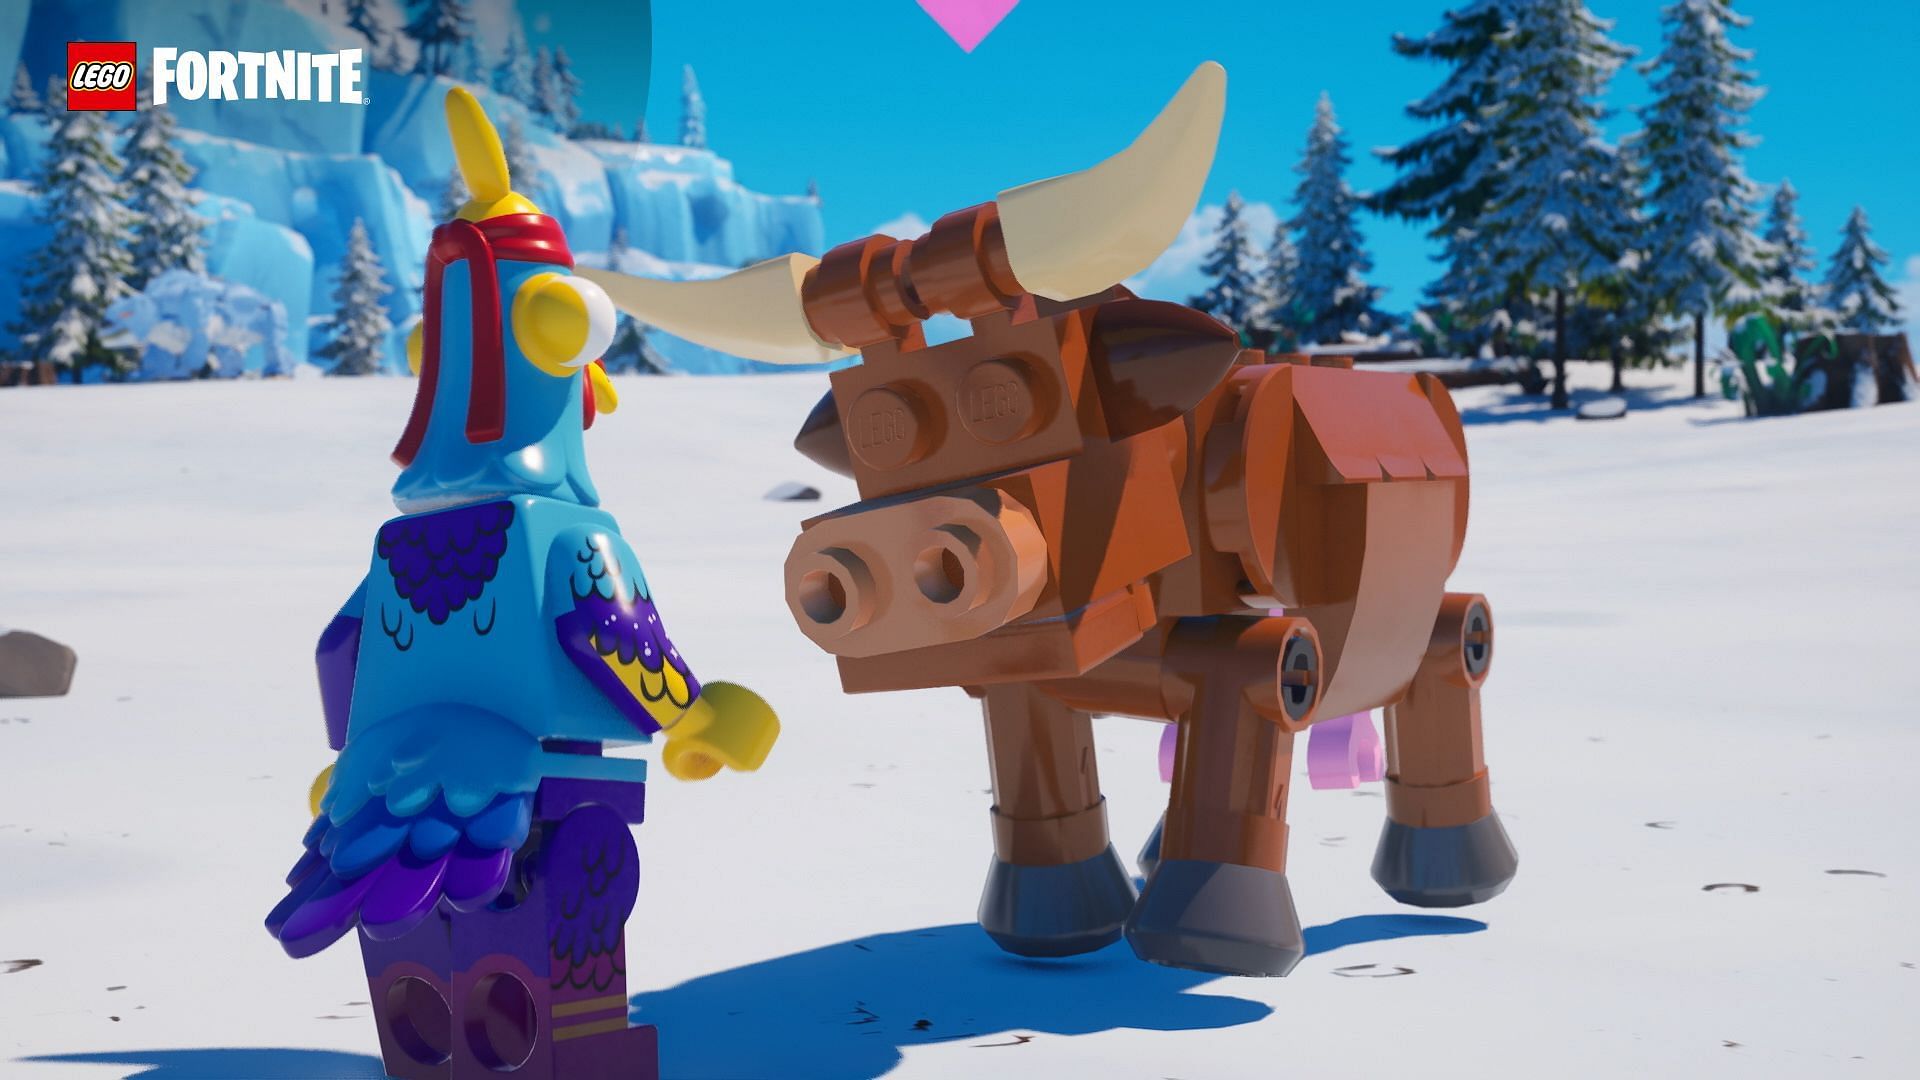 Rideable wildlife could be coming to LEGO Fortnite